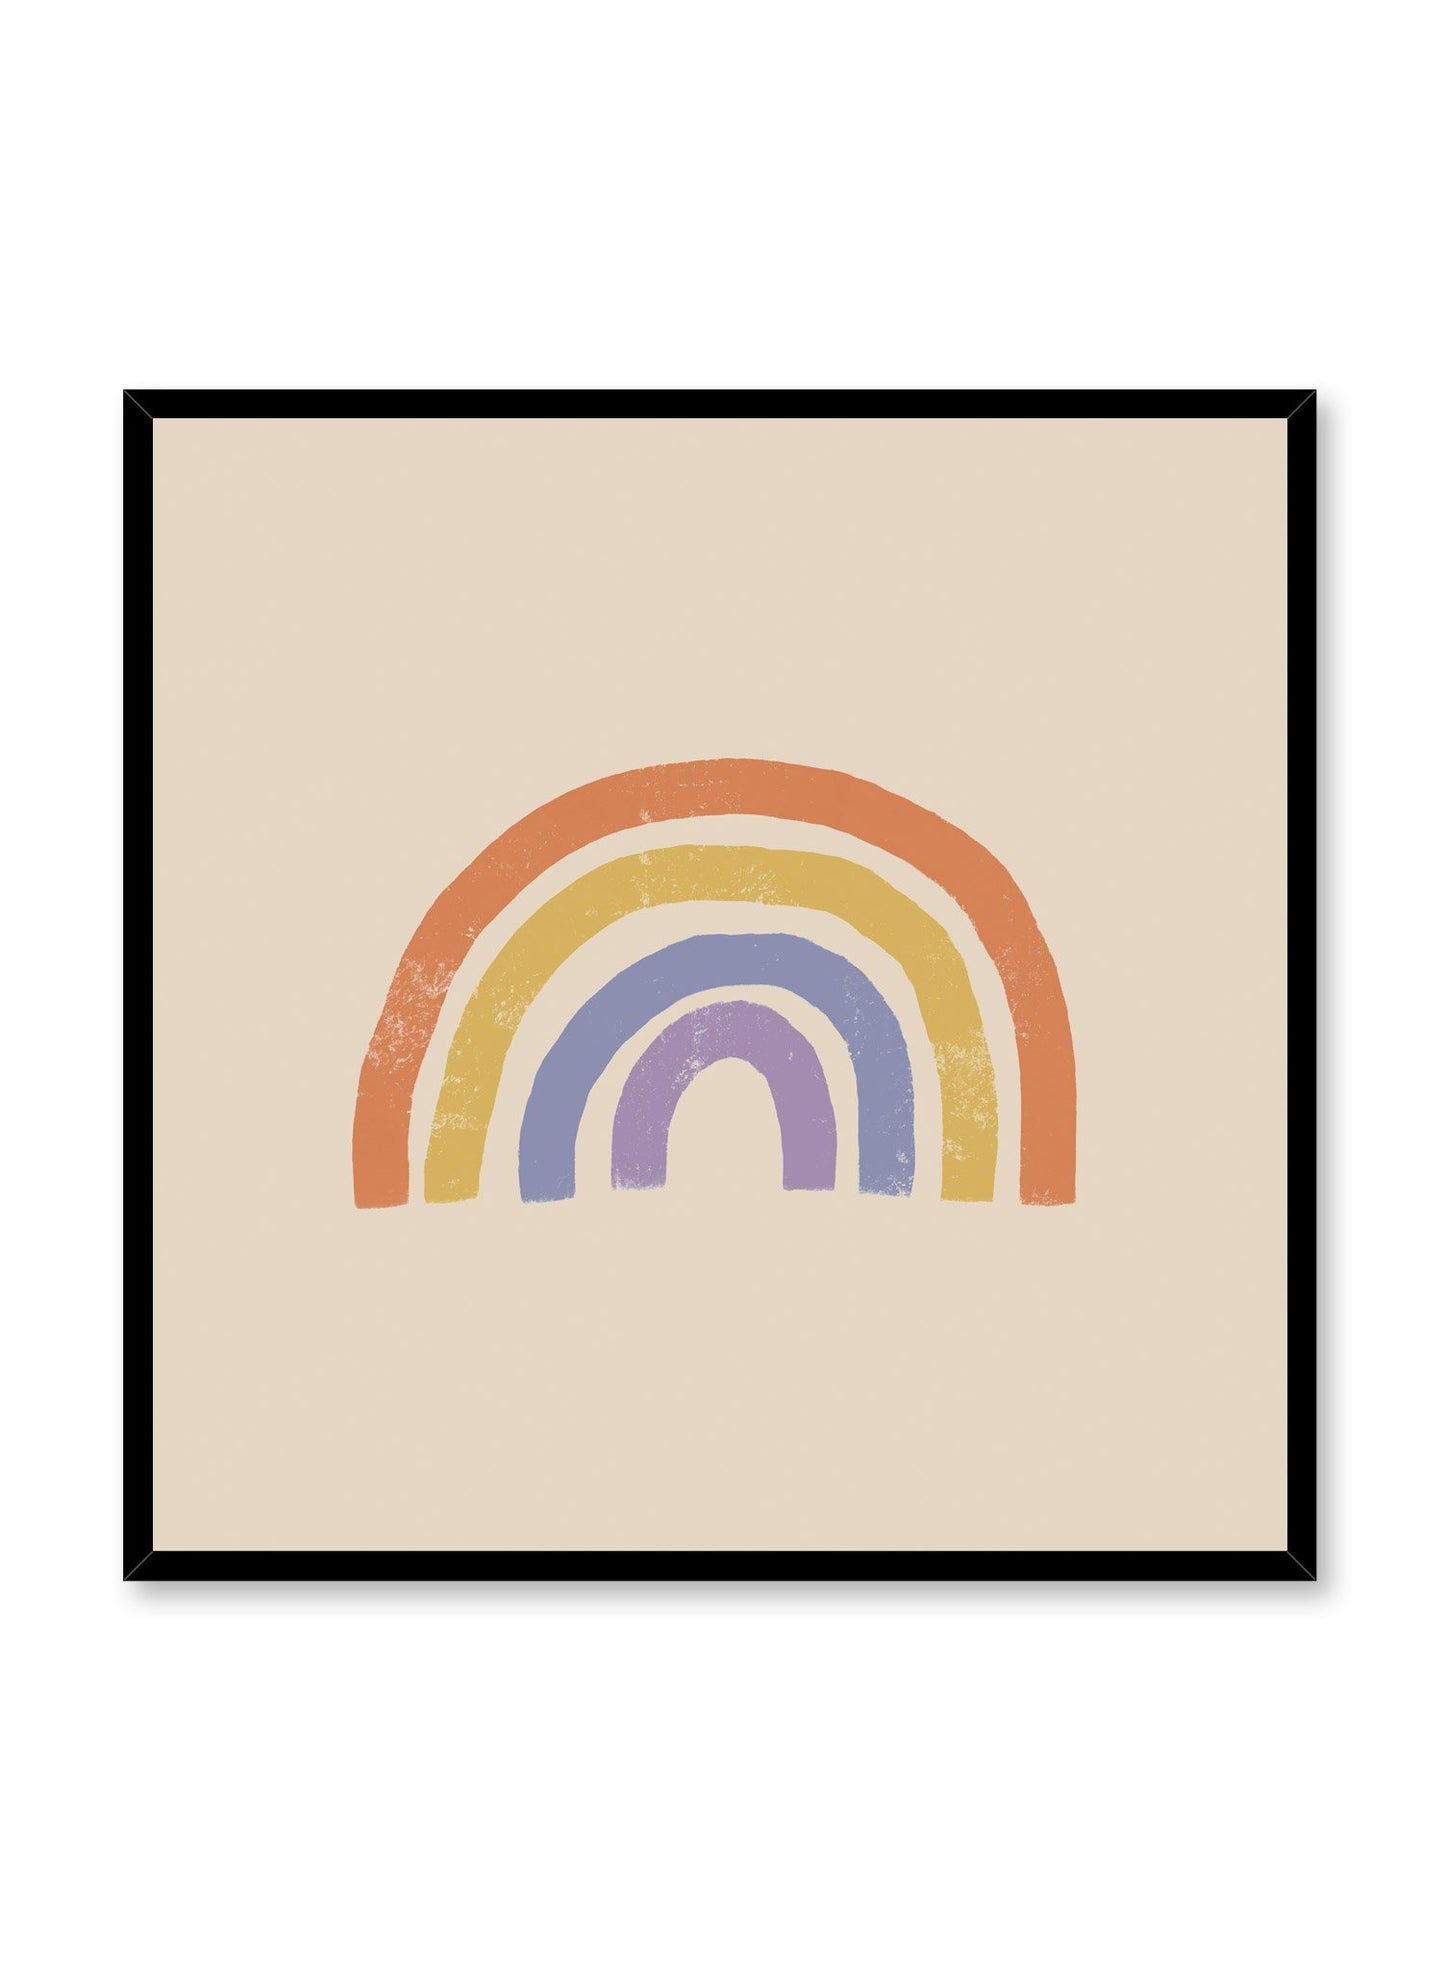 Modern minimalist poster by Opposite Wall with abstract design of Rainbow in square format